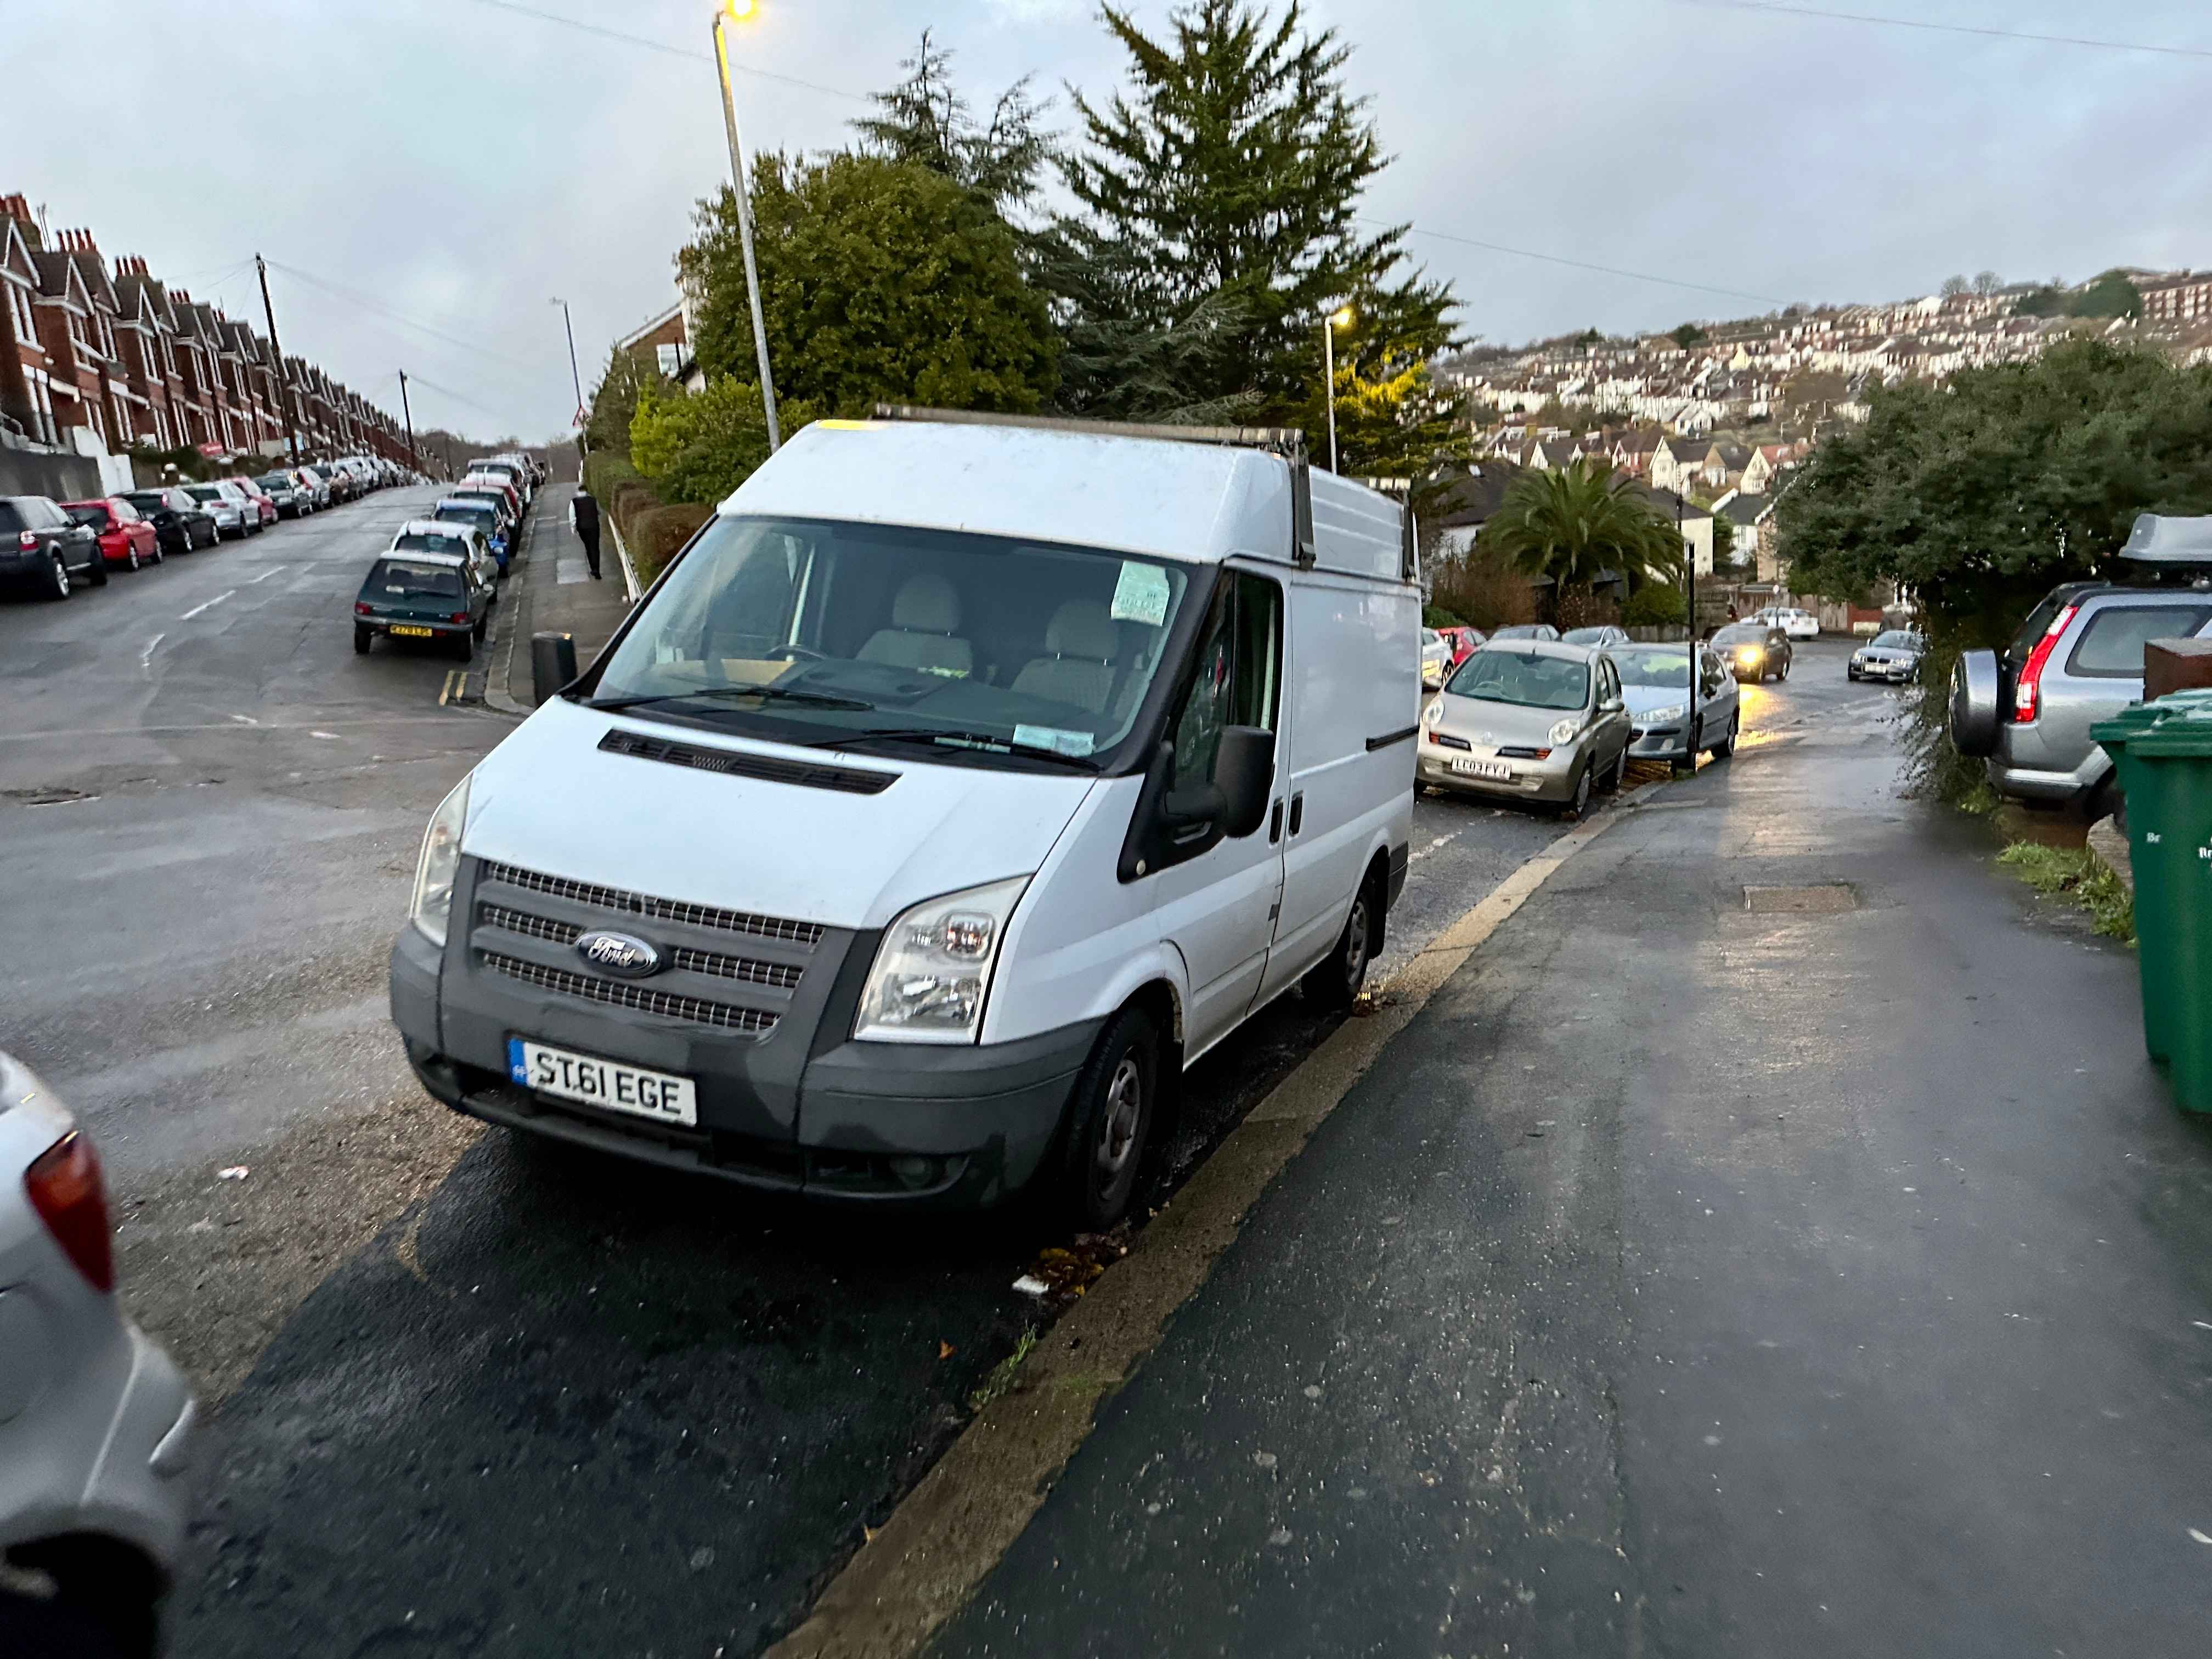 Photograph of ST61 EGE - a White Ford Transit parked in Hollingdean by a non-resident. The fourth of six photographs supplied by the residents of Hollingdean.